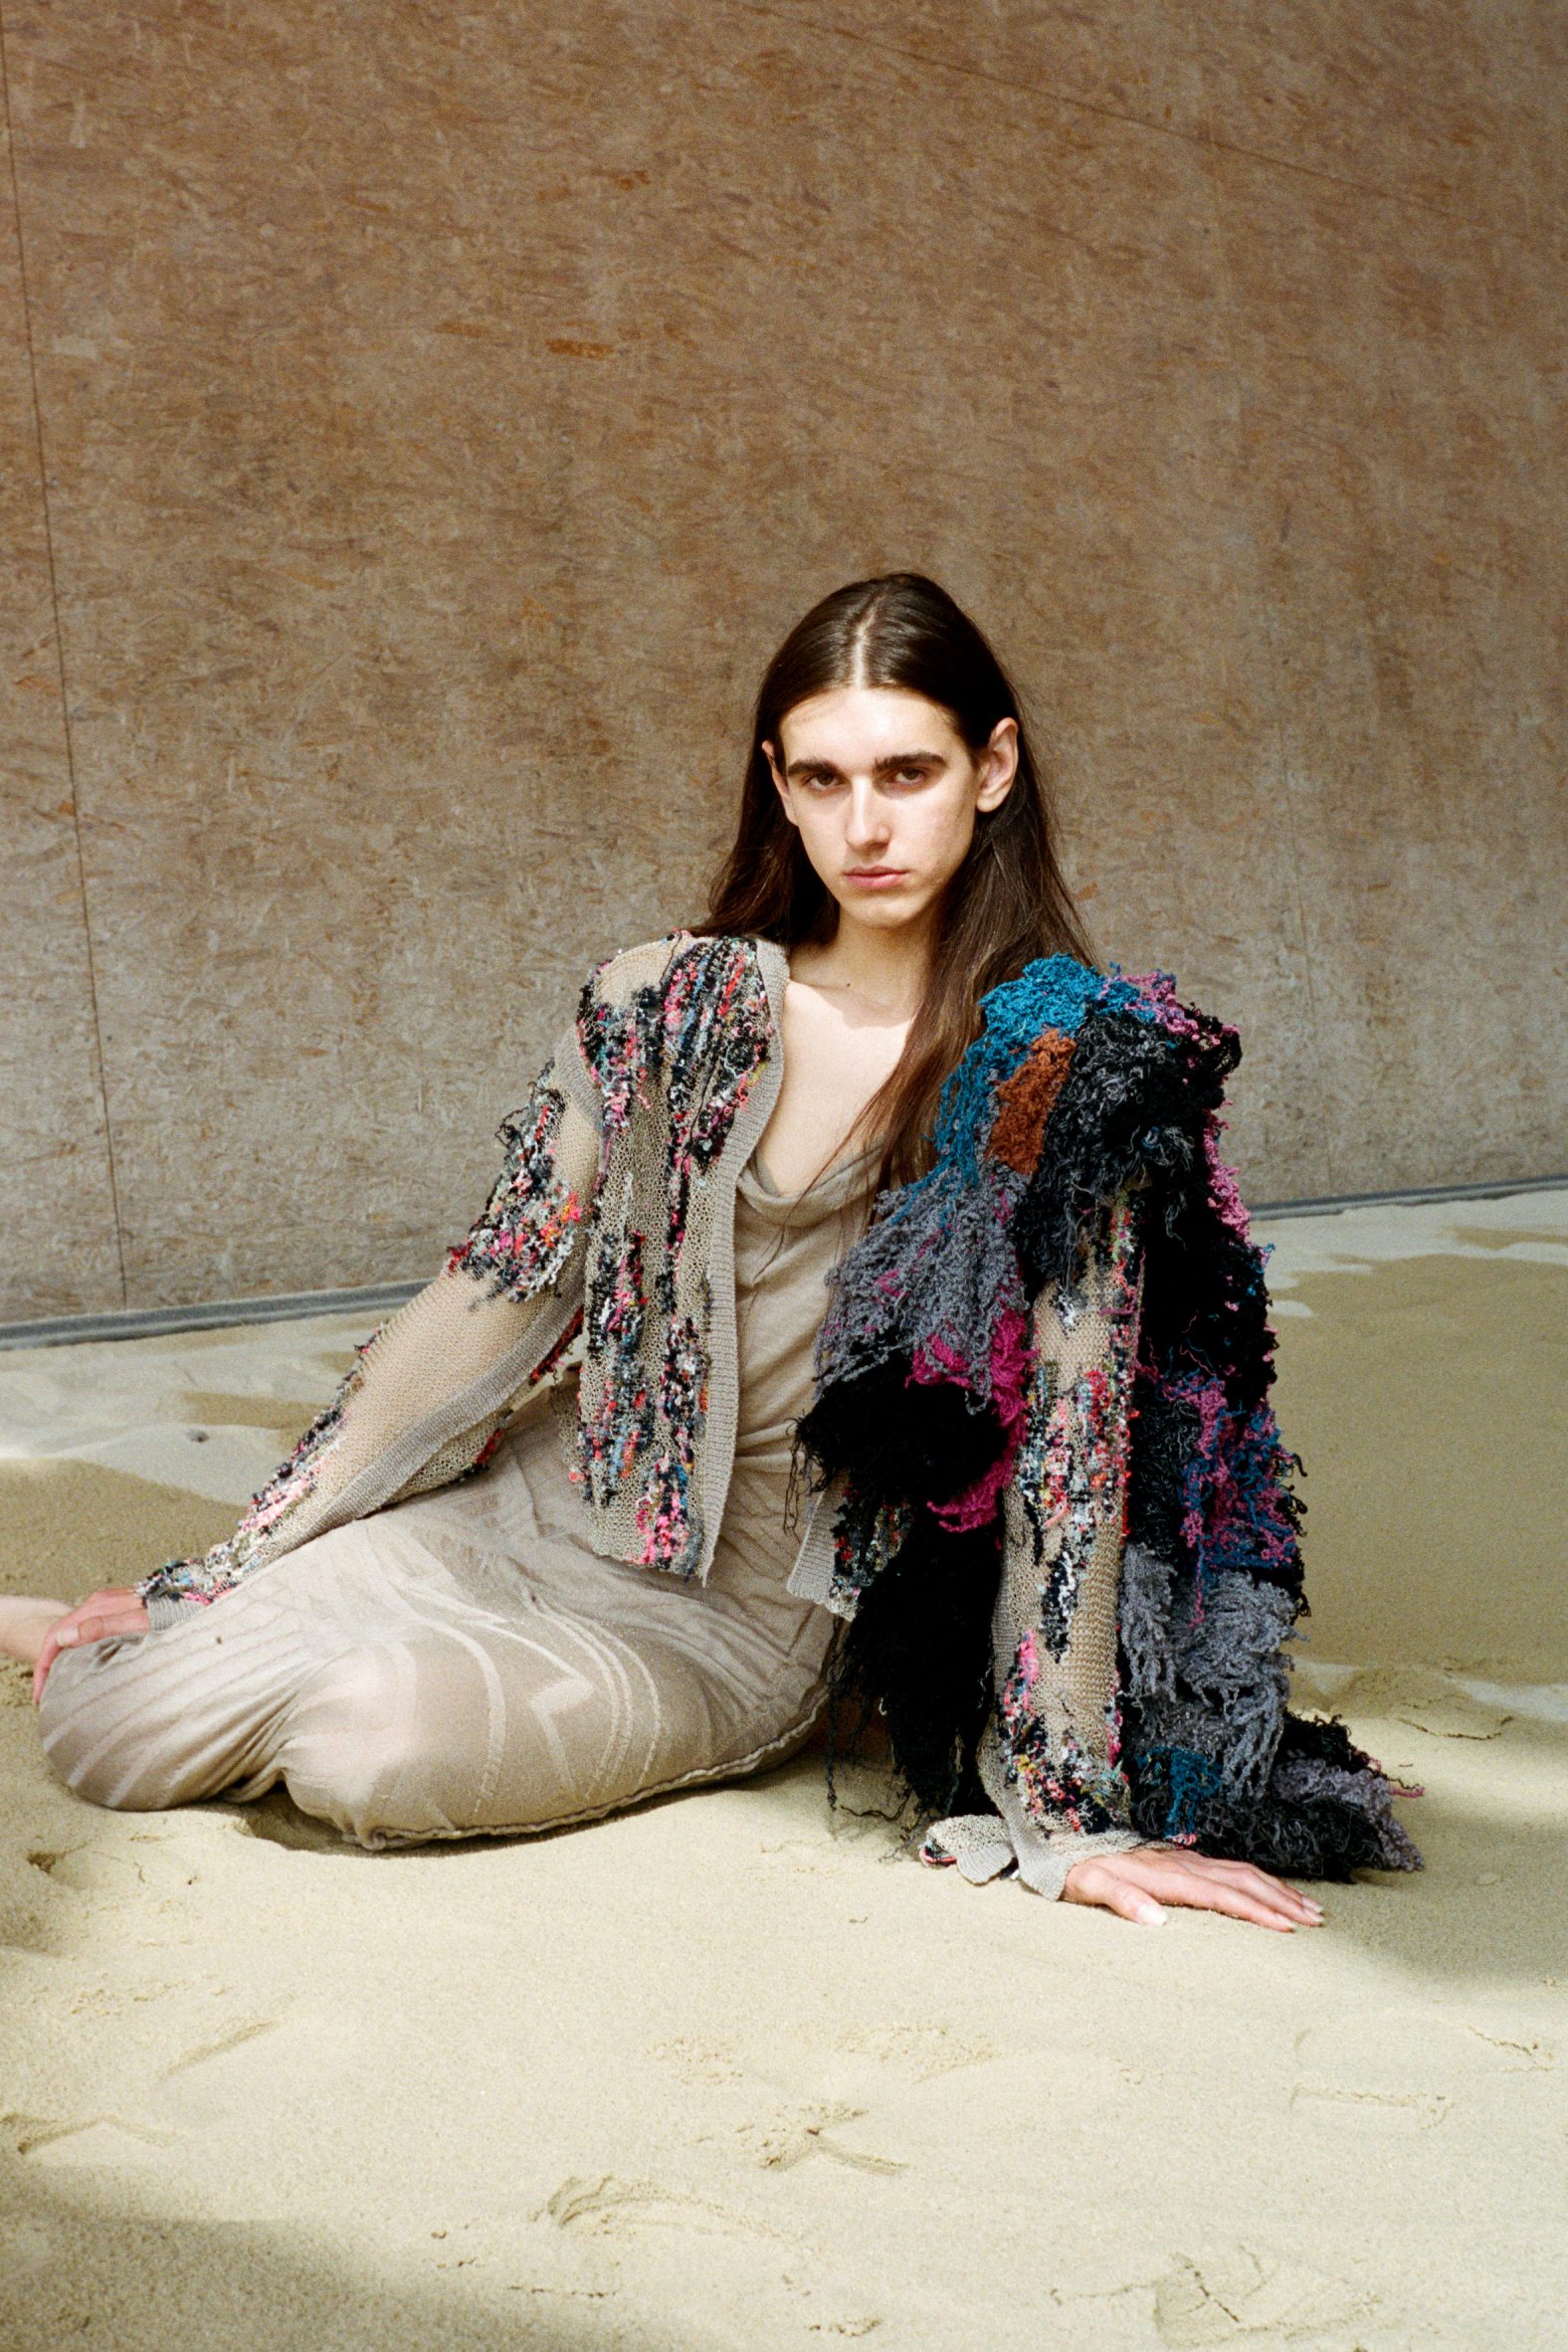 Seated model wearing multicoloured, shaggy garments